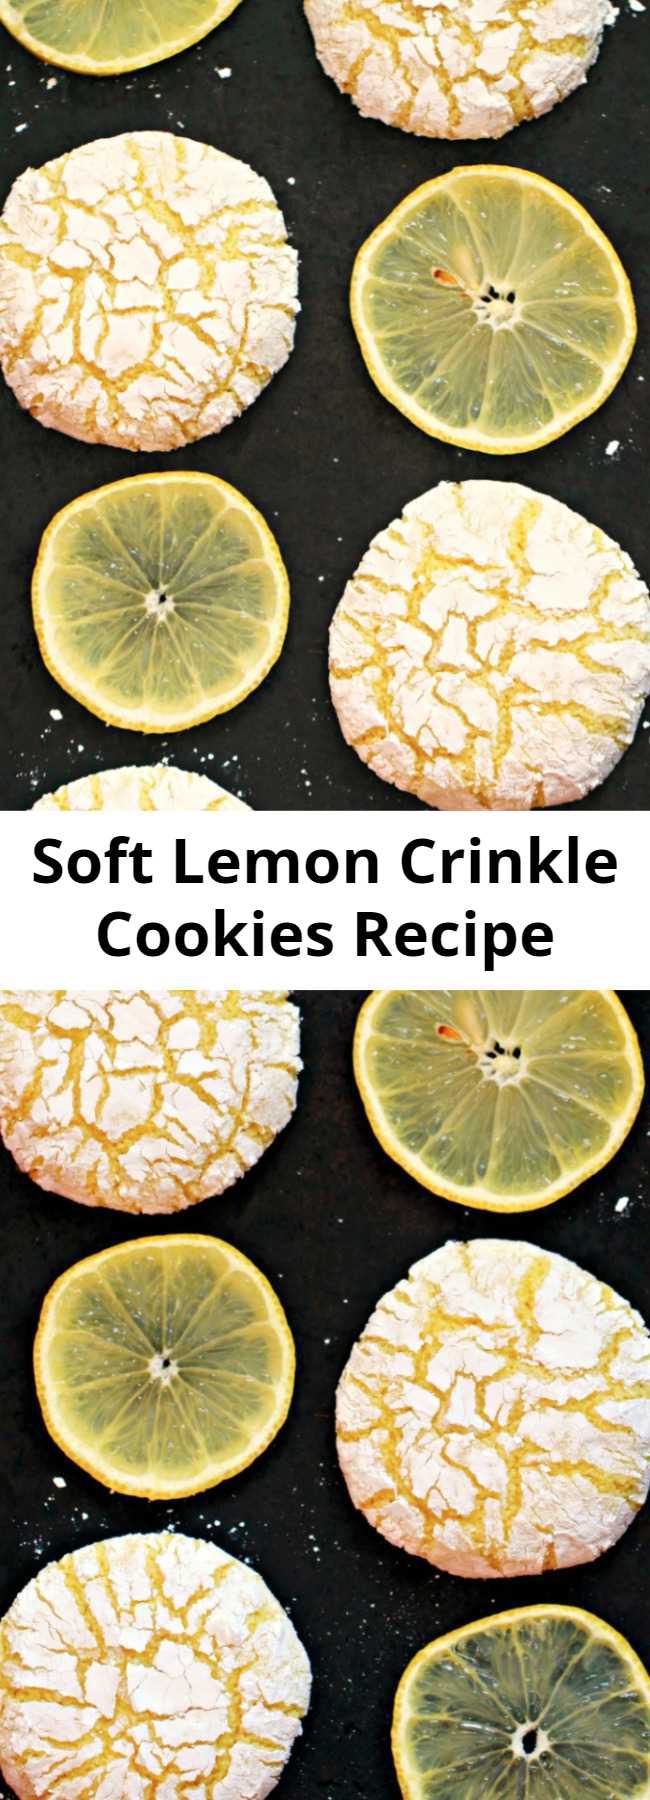 Soft Lemon Crinkle Cookies Recipe - These melt-in-your-mouth Lemon Crinkle Cookies are absolutely dreamy. This cookie recipe is one of my favourites, I could have these for dessert everyday and be happy!